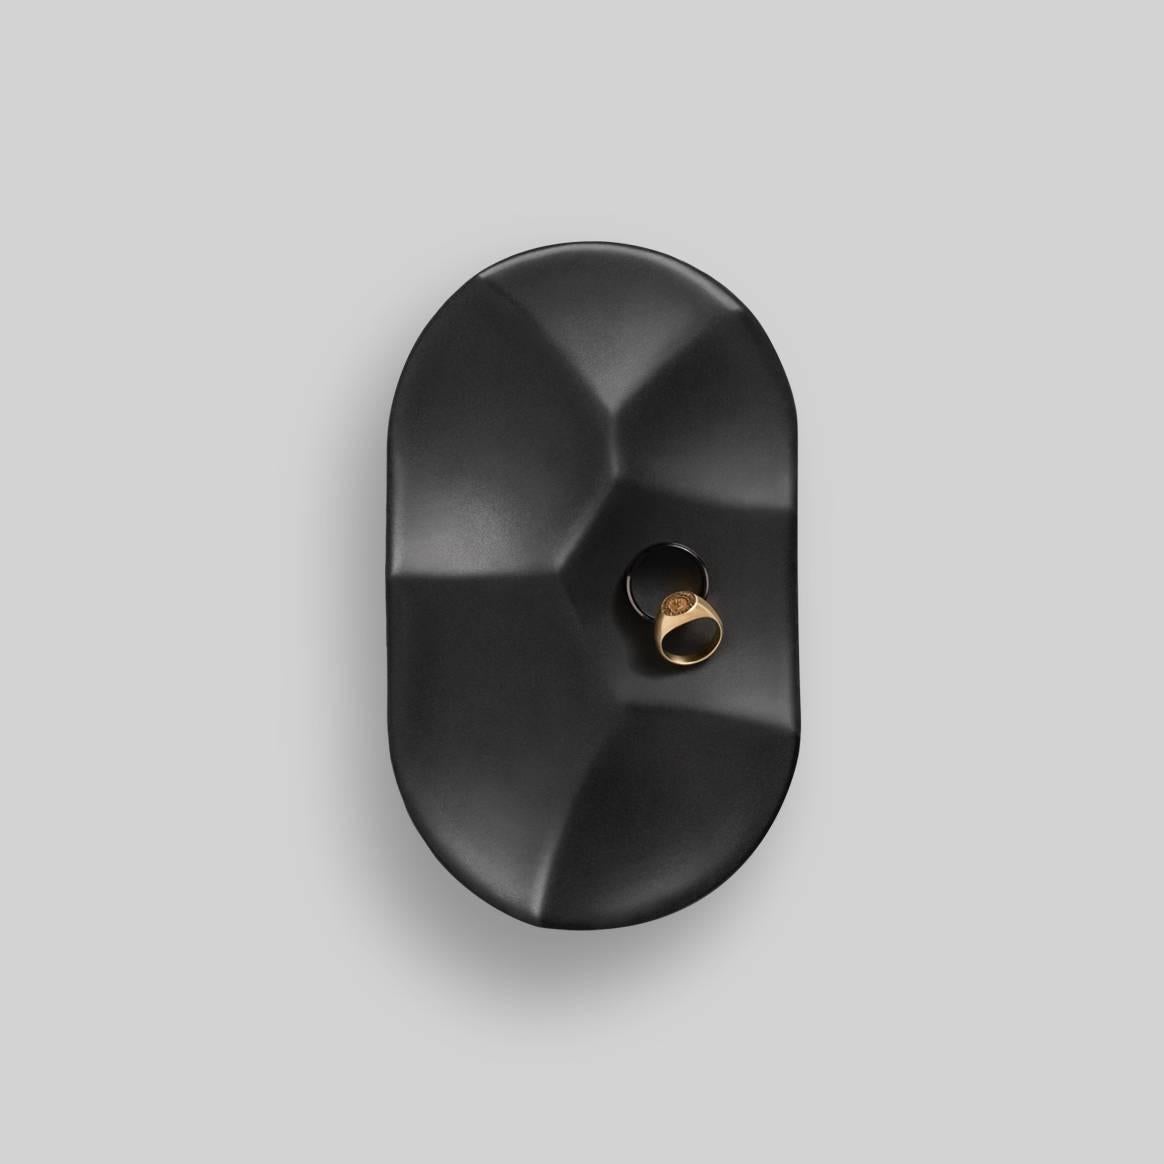 Inspired by the shapes created when yogurt is eaten with a spoon, the carved pill bowl incorporates an elegance and sophistication that will elevate any situation. Its partitions allow the user to easily compartmentalize their favourite belongings